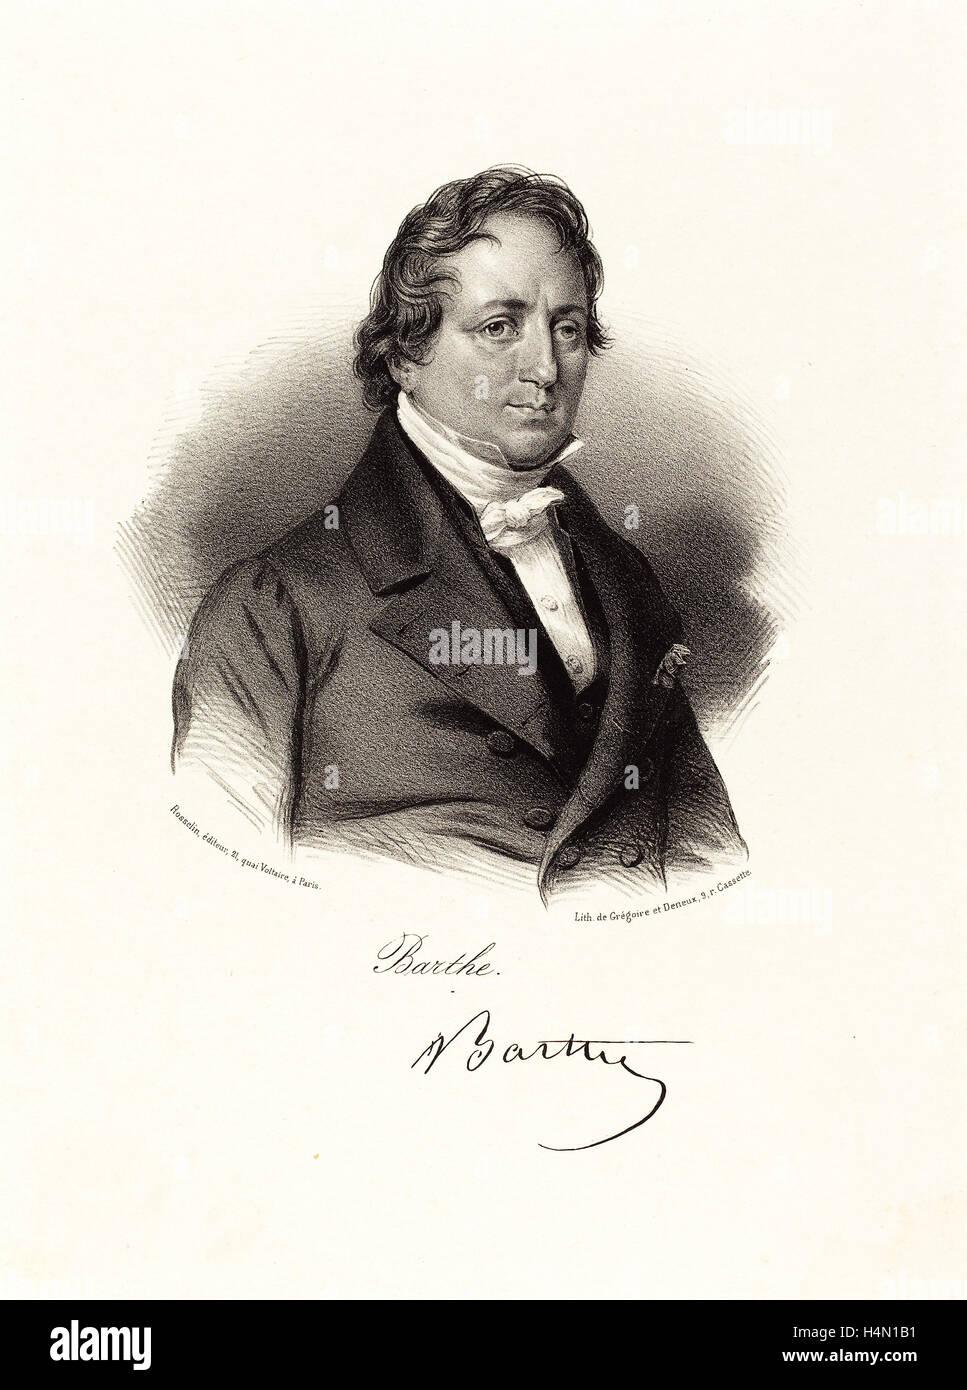 Probably French 19th Century, Barthe, lithograph Stock Photo